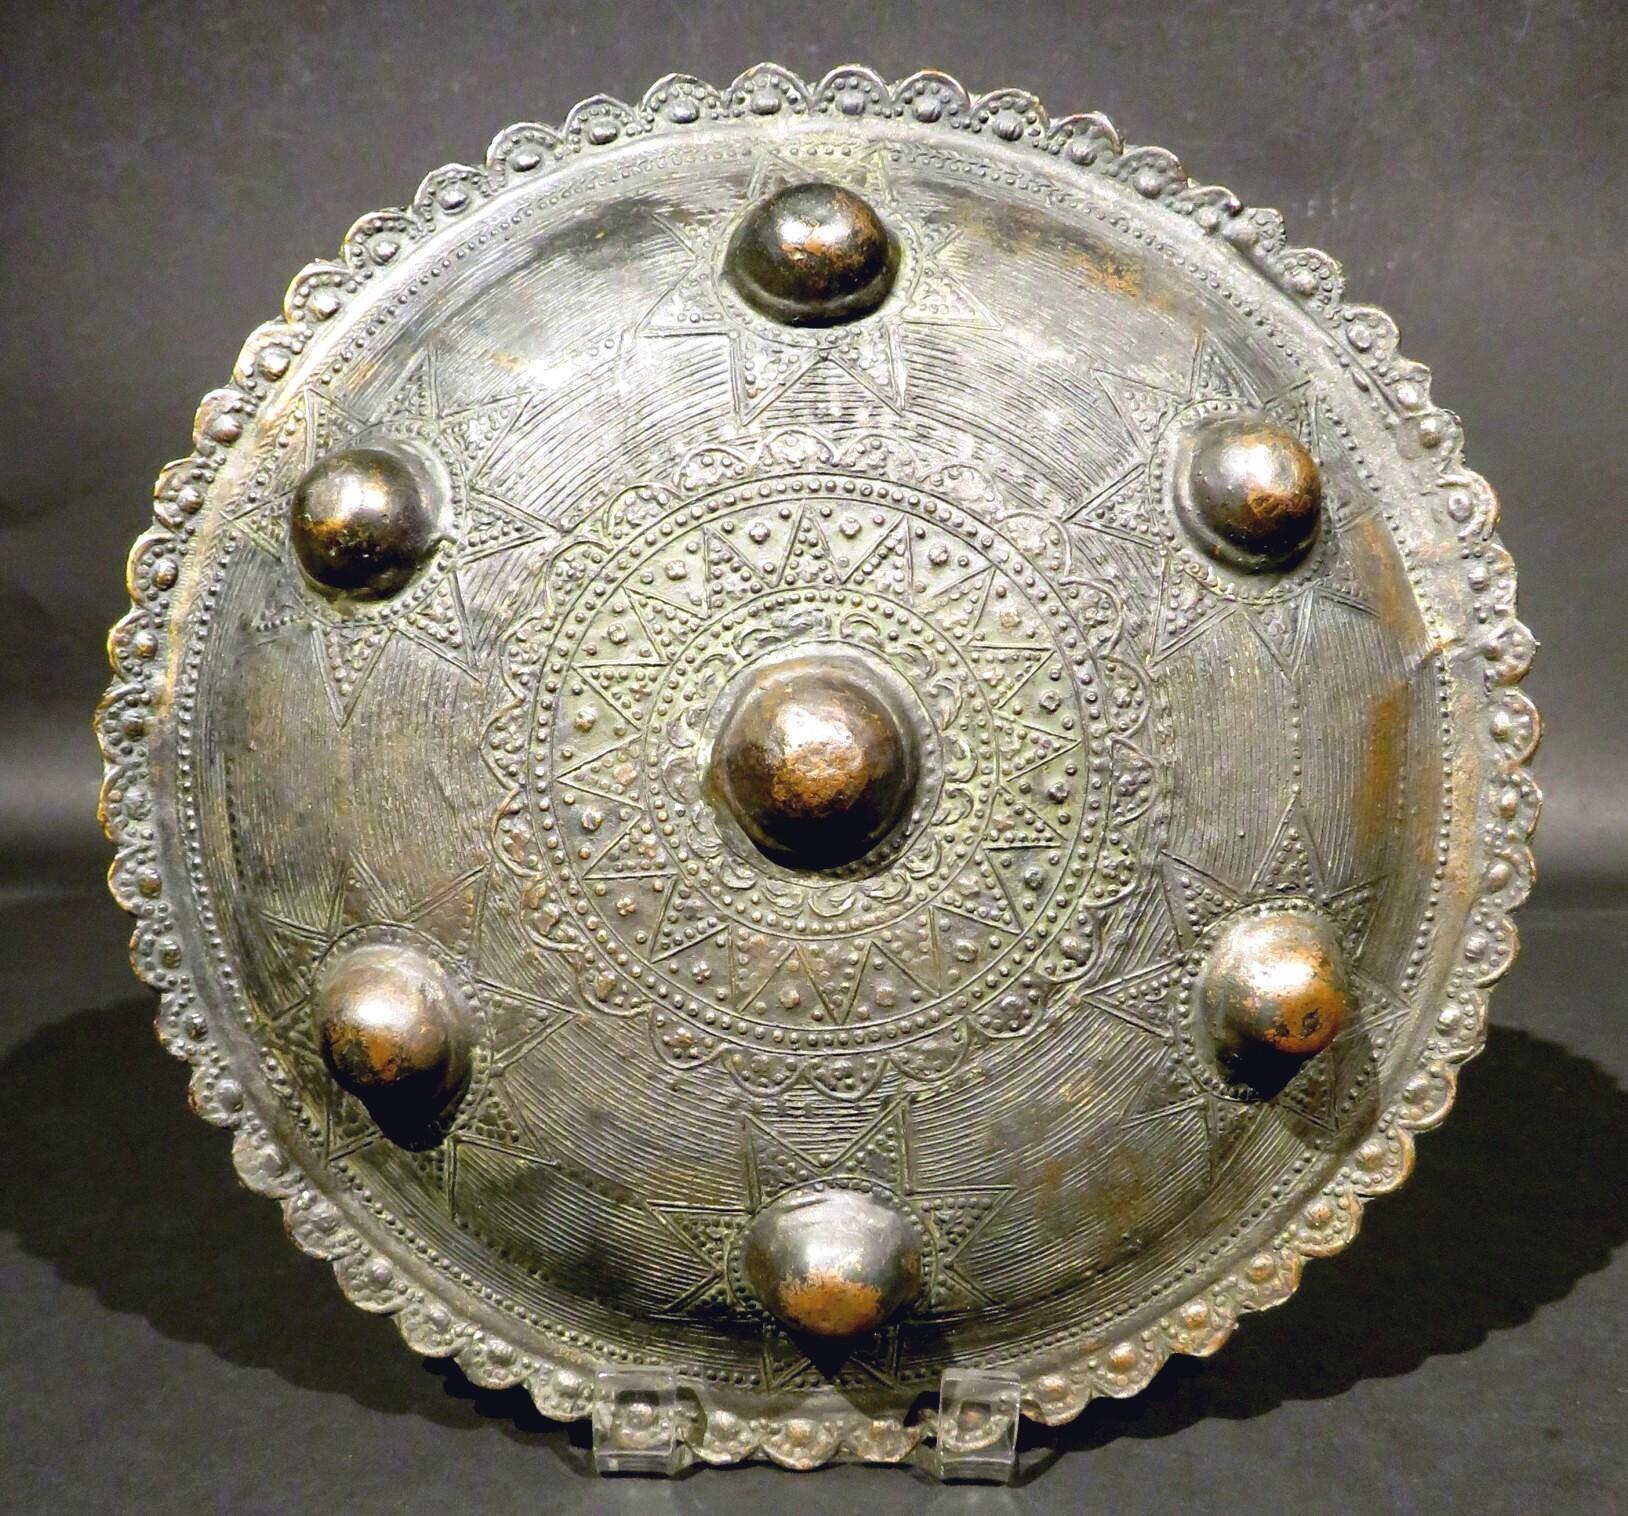 From the North Sumatran region of the Acehnese people, the convex exterior surface showing seven semi-spherical protrusions or bosses centring Islamic inspired star motifs, the reverse showing four eyelets intended for attaching a hand-held strap.